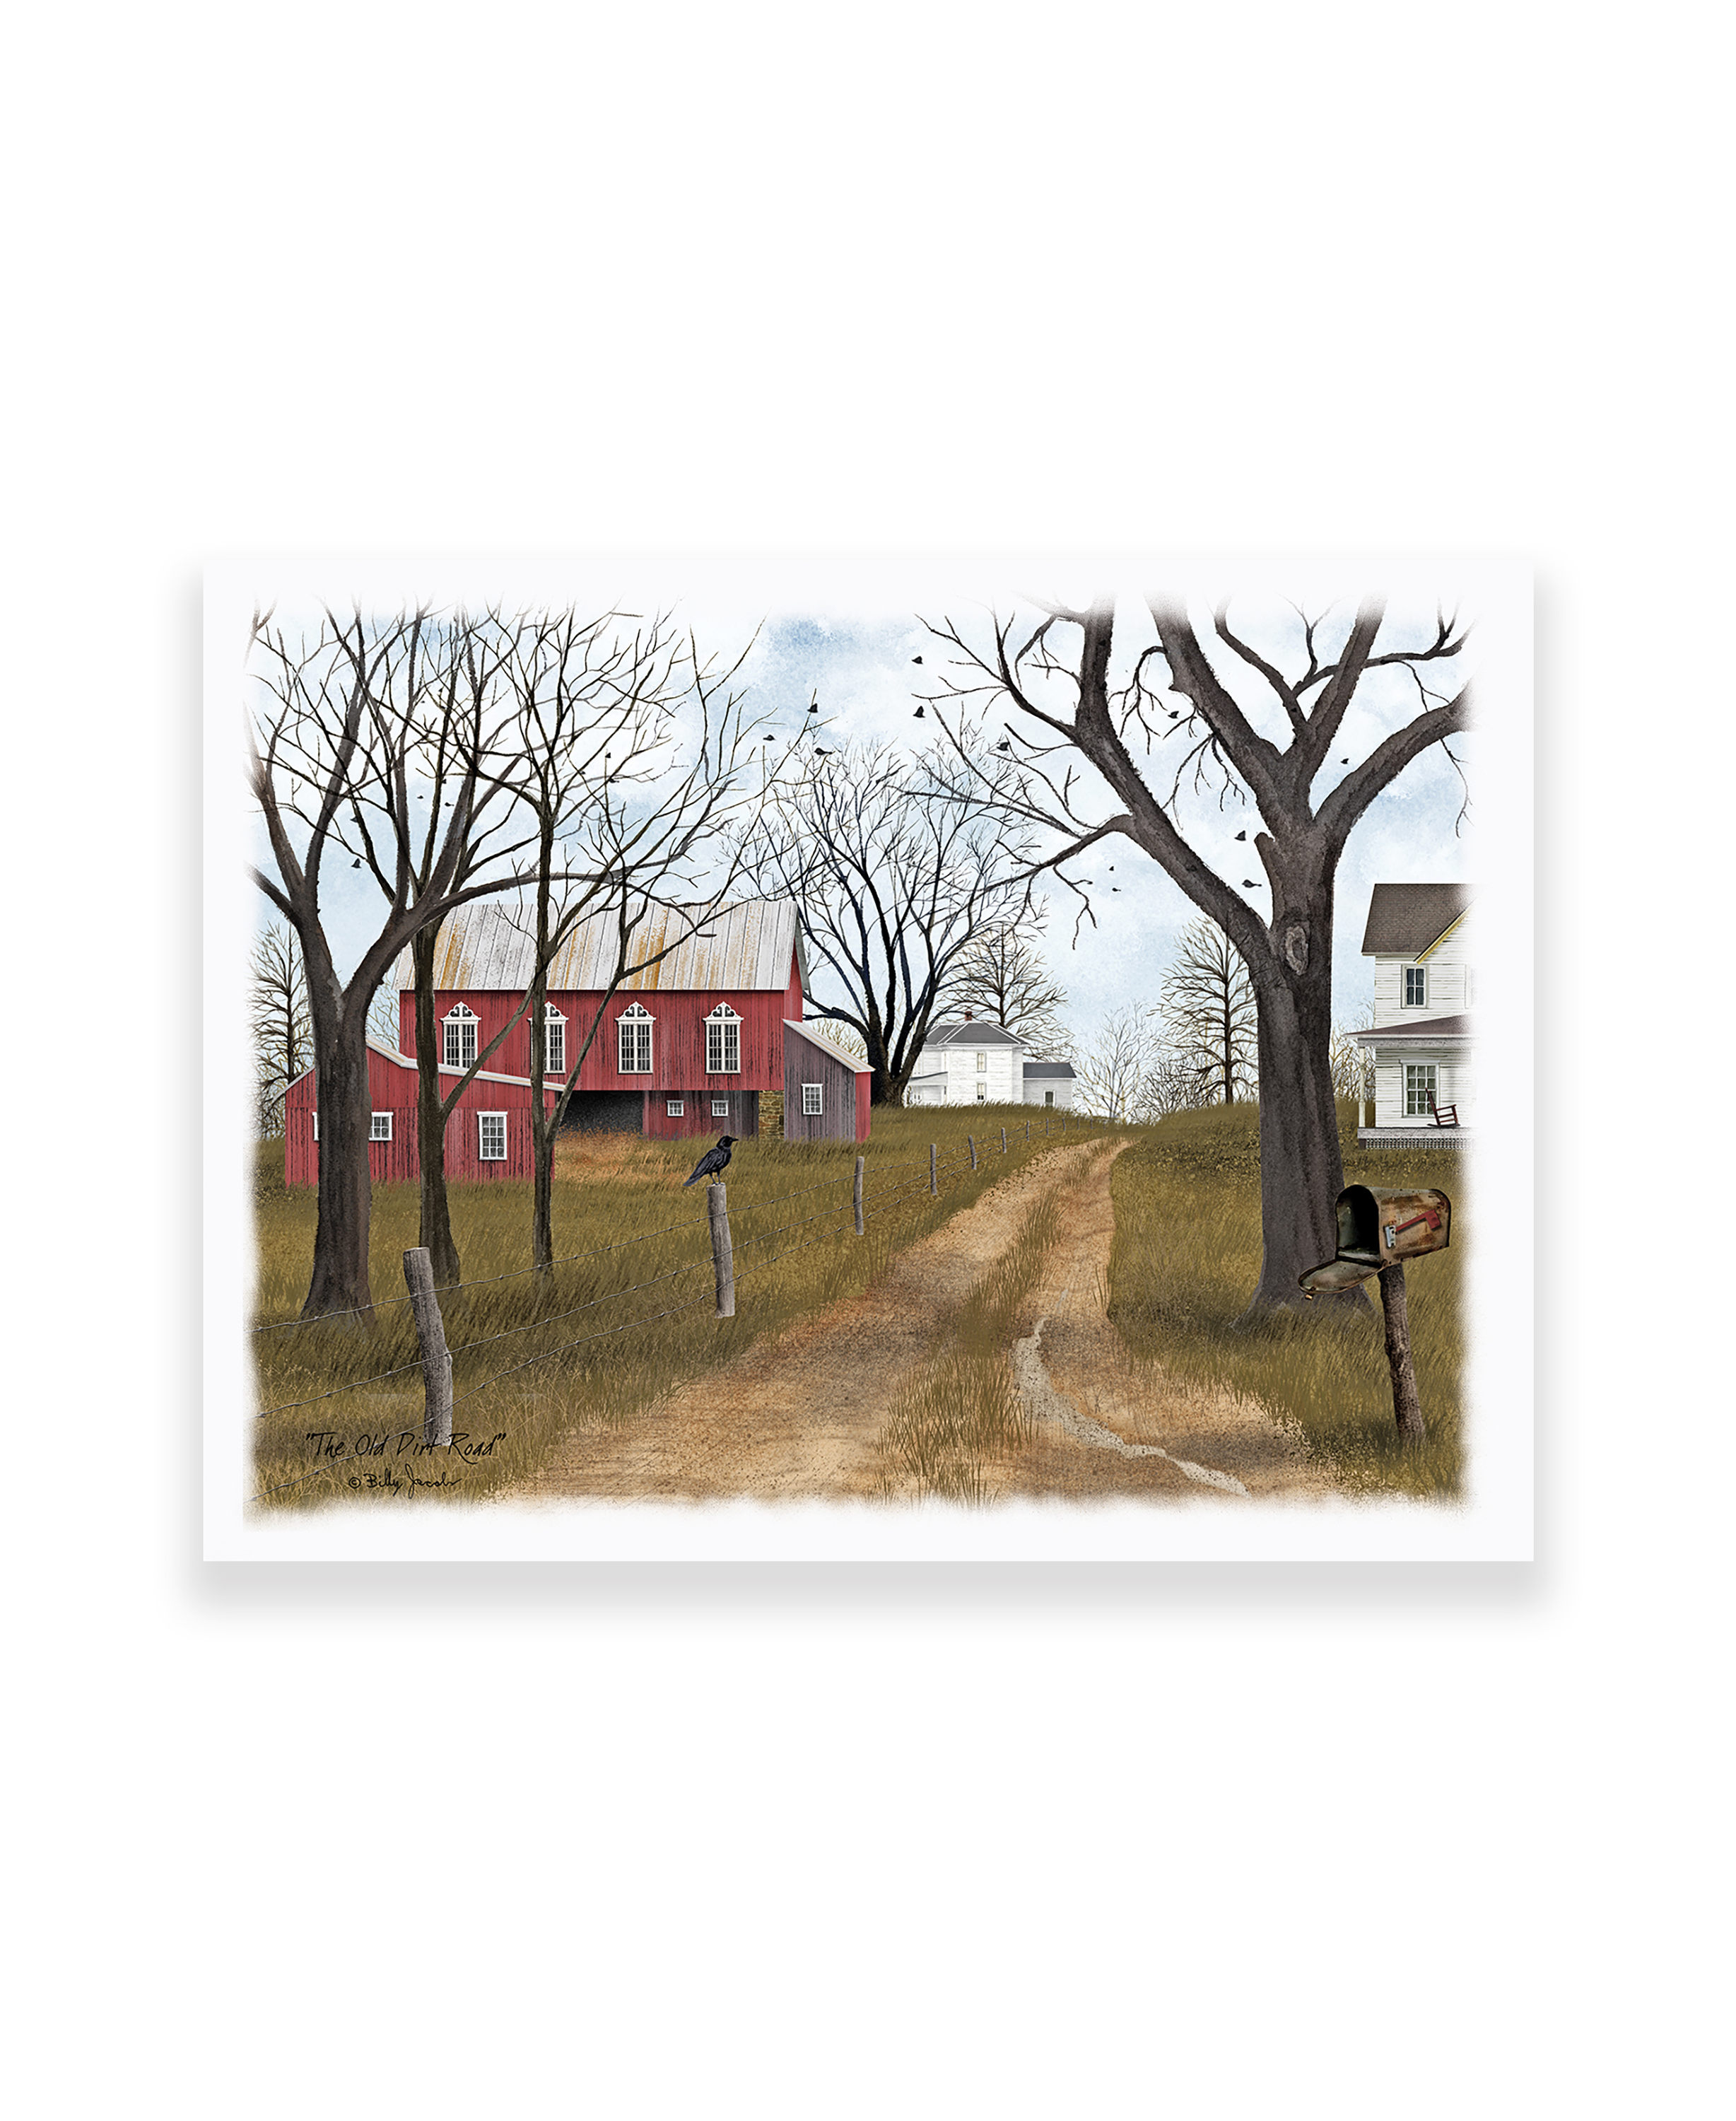 "The Old Dirt Road" by Billy Jacobs, Ready to Hang Canvas Art